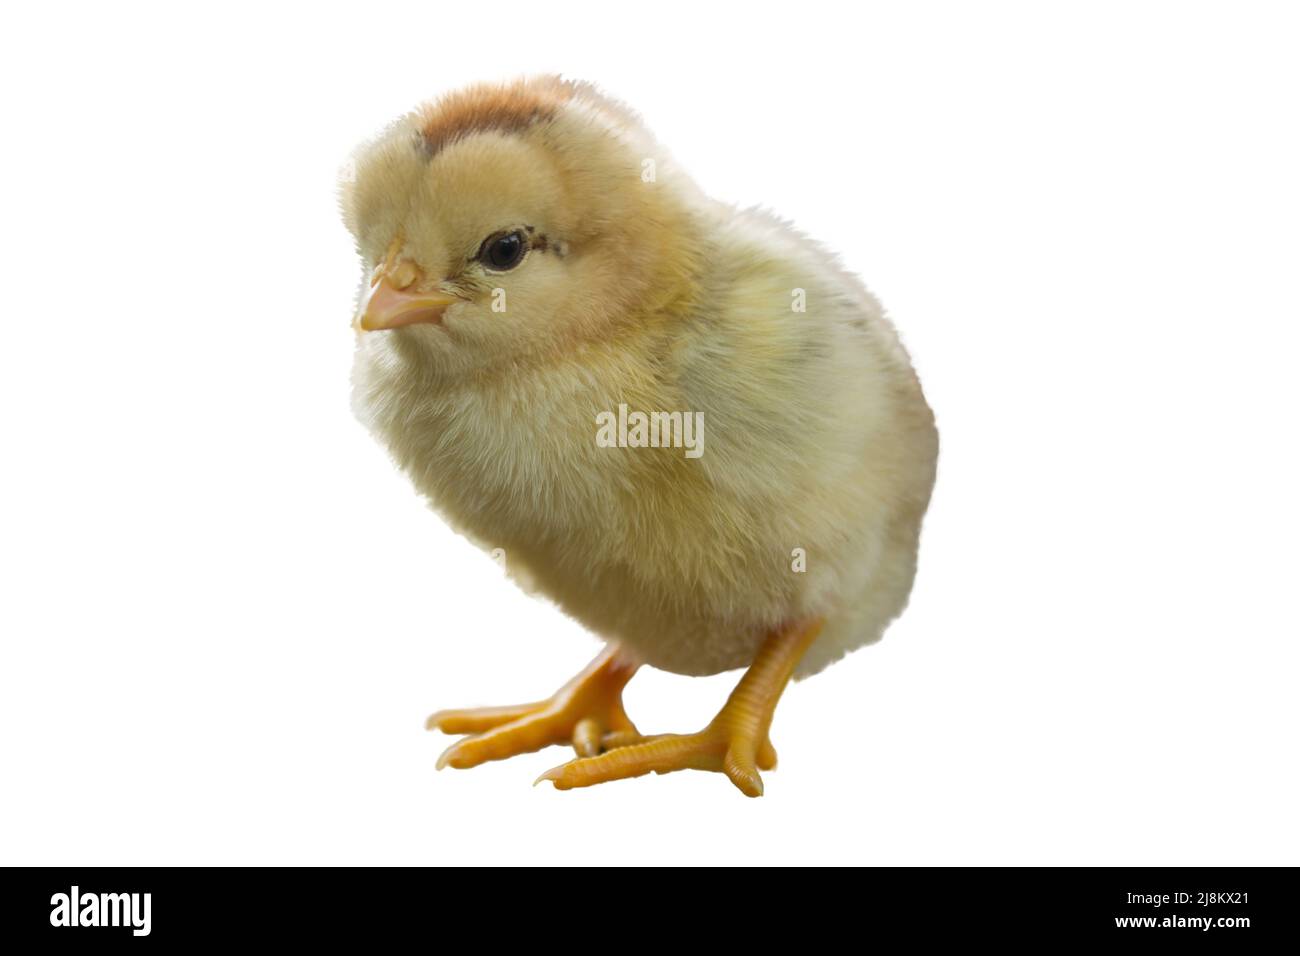 Cute little chicken isolated on white background Stock Photo